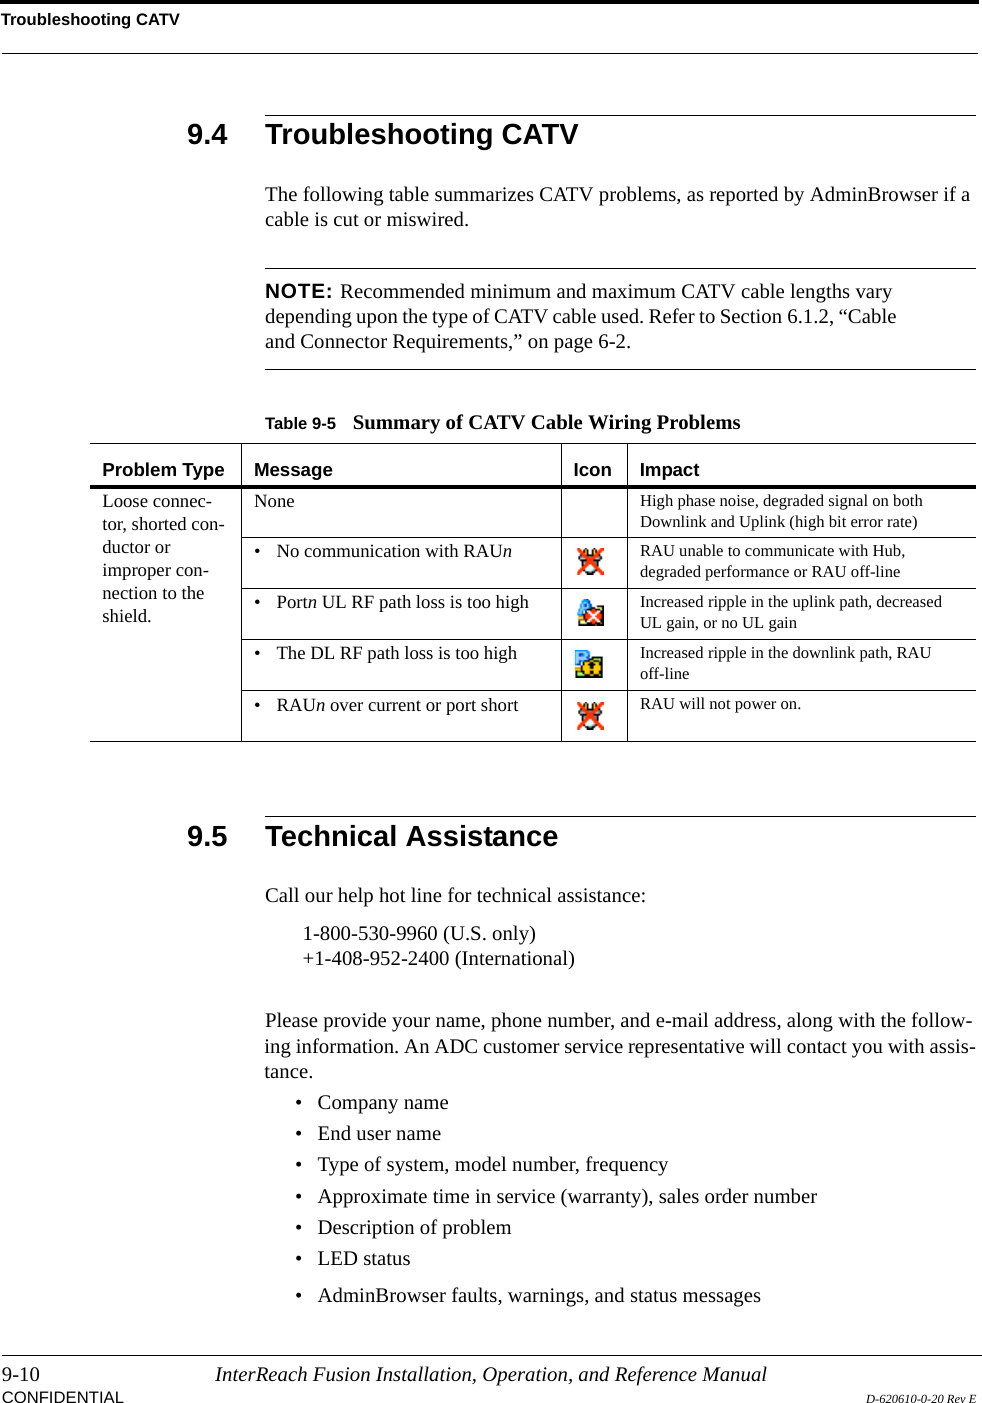 Troubleshooting CATV9-10 InterReach Fusion Installation, Operation, and Reference ManualCONFIDENTIAL D-620610-0-20 Rev E9.4 Troubleshooting CATVThe following table summarizes CATV problems, as reported by AdminBrowser if a cable is cut or miswired.NOTE: Recommended minimum and maximum CATV cable lengths vary depending upon the type of CATV cable used. Refer to Section 6.1.2, “Cable and Connector Requirements,” on page 6-2.9.5 Technical AssistanceCall our help hot line for technical assistance:1-800-530-9960 (U.S. only)+1-408-952-2400 (International)Please provide your name, phone number, and e-mail address, along with the follow-ing information. An ADC customer service representative will contact you with assis-tance.• Company name• End user name• Type of system, model number, frequency• Approximate time in service (warranty), sales order number• Description of problem• LED status• AdminBrowser faults, warnings, and status messagesTable 9-5 Summary of CATV Cable Wiring ProblemsProblem Type Message Icon ImpactLoose connec-tor, shorted con-ductor or improper con-nection to the shield.None High phase noise, degraded signal on both Downlink and Uplink (high bit error rate)• No communication with RAUn  RAU unable to communicate with Hub, degraded performance or RAU off-line• Portn UL RF path loss is too high Increased ripple in the uplink path, decreased UL gain, or no UL gain• The DL RF path loss is too high Increased ripple in the downlink path, RAU off-line•RAUn over current or port short RAU will not power on.